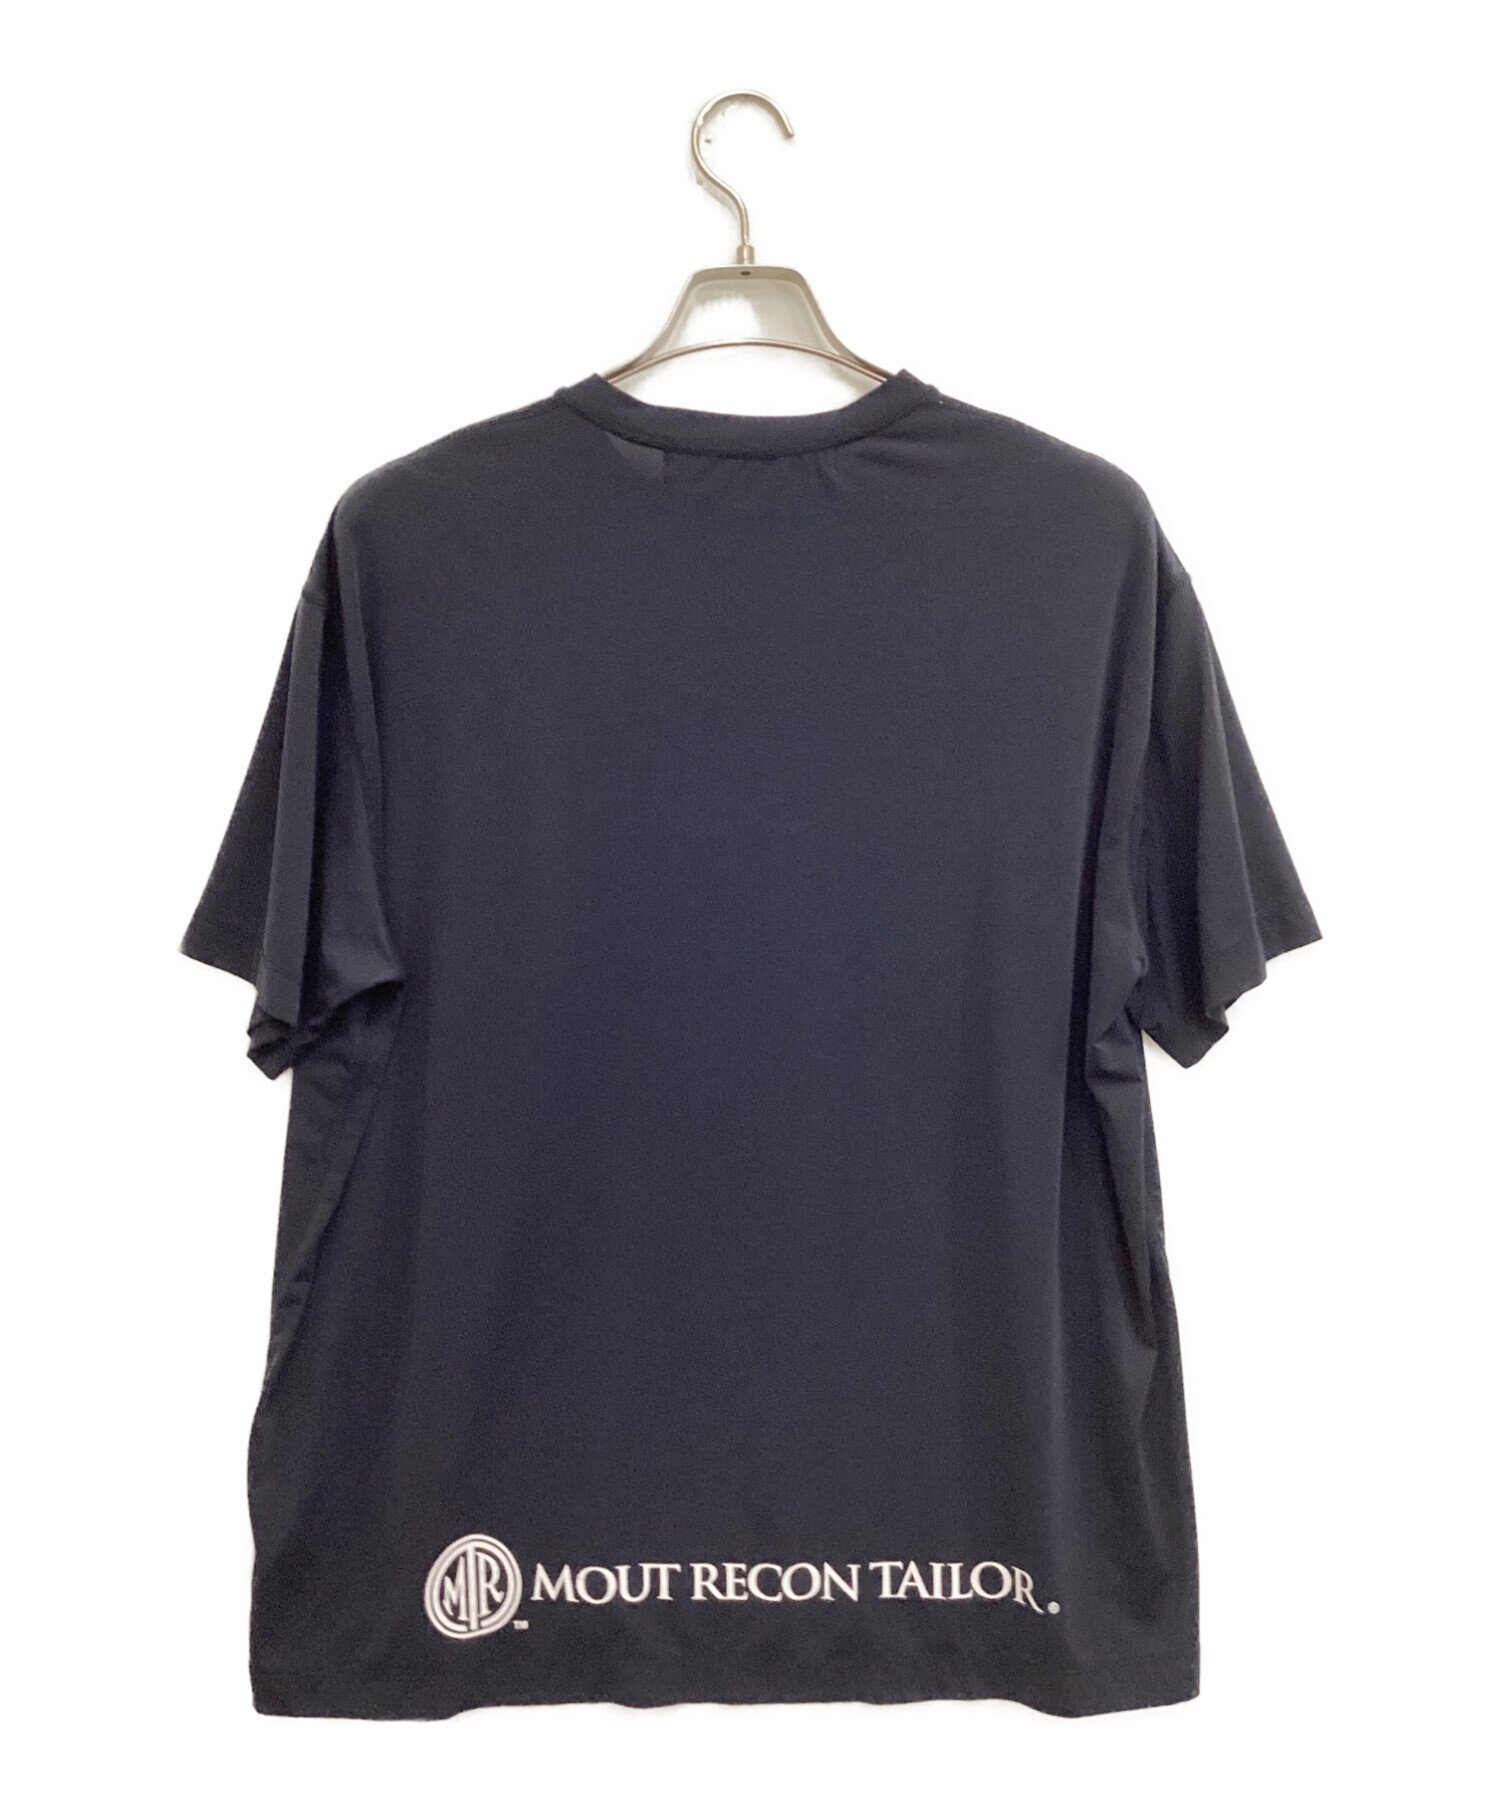 mout recon tailor 46メンズ